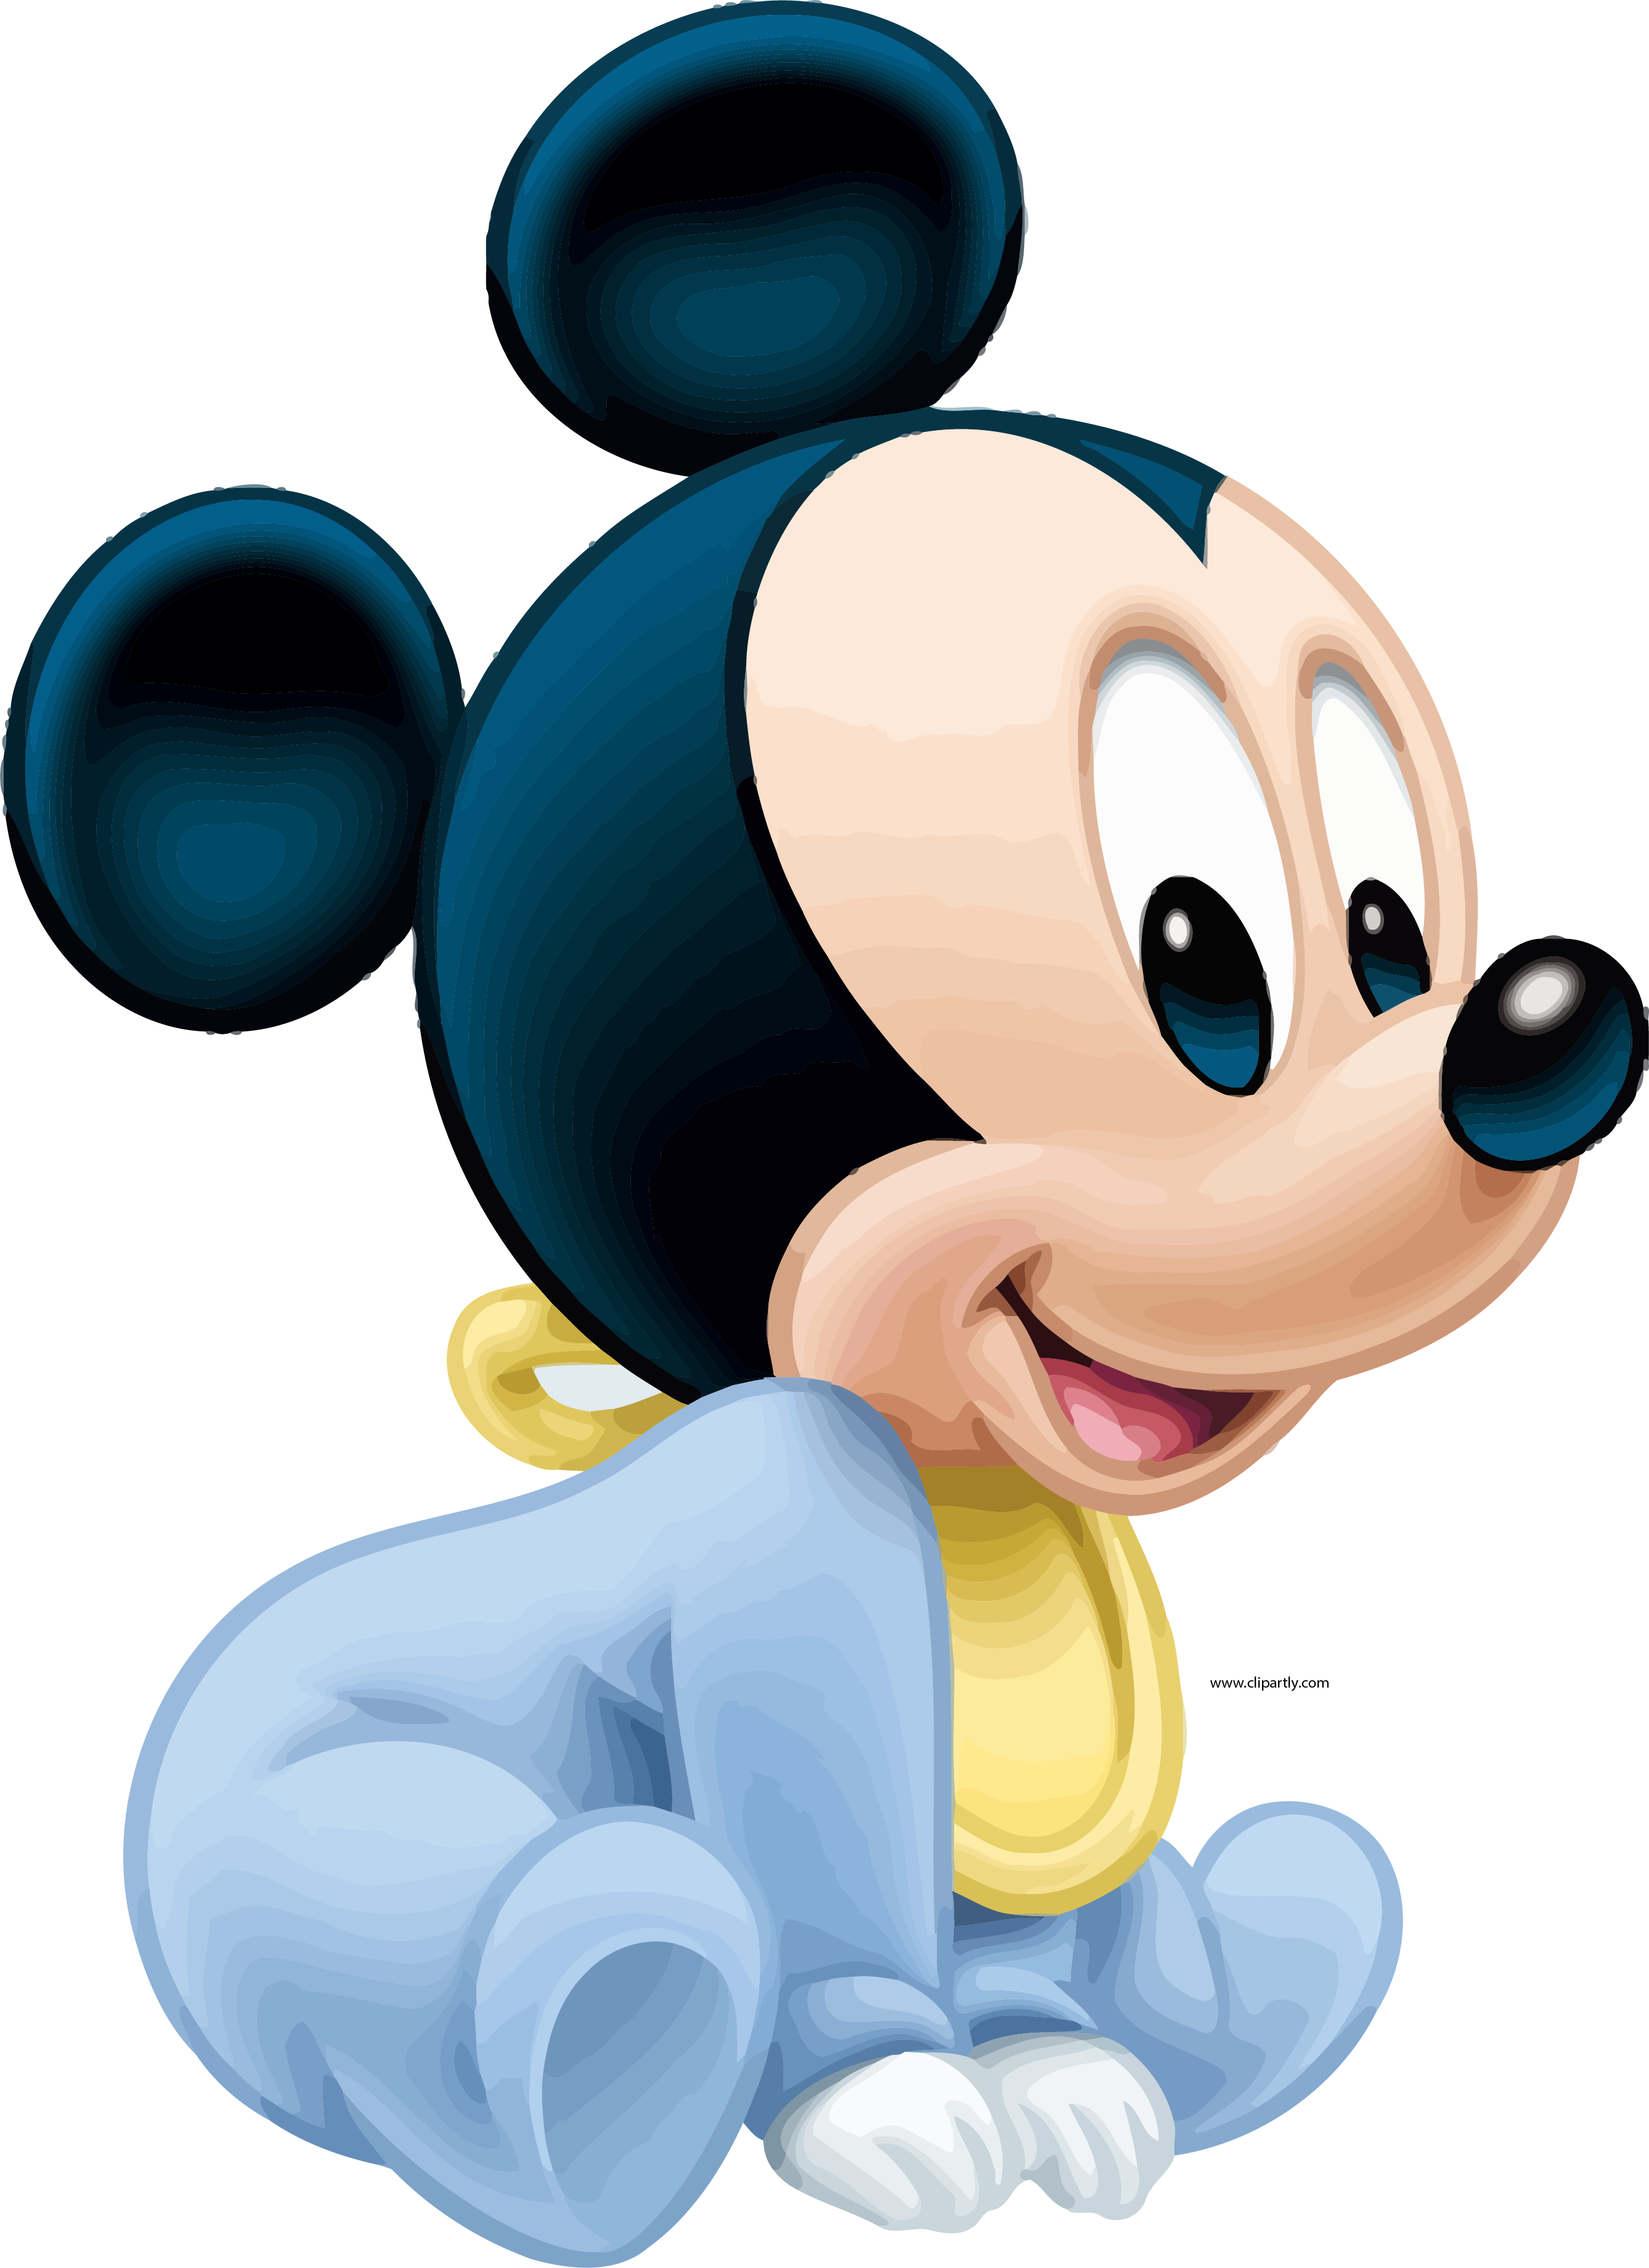 Mickey Infant Wallpaper Minnie Pluto Mouse PNG Image